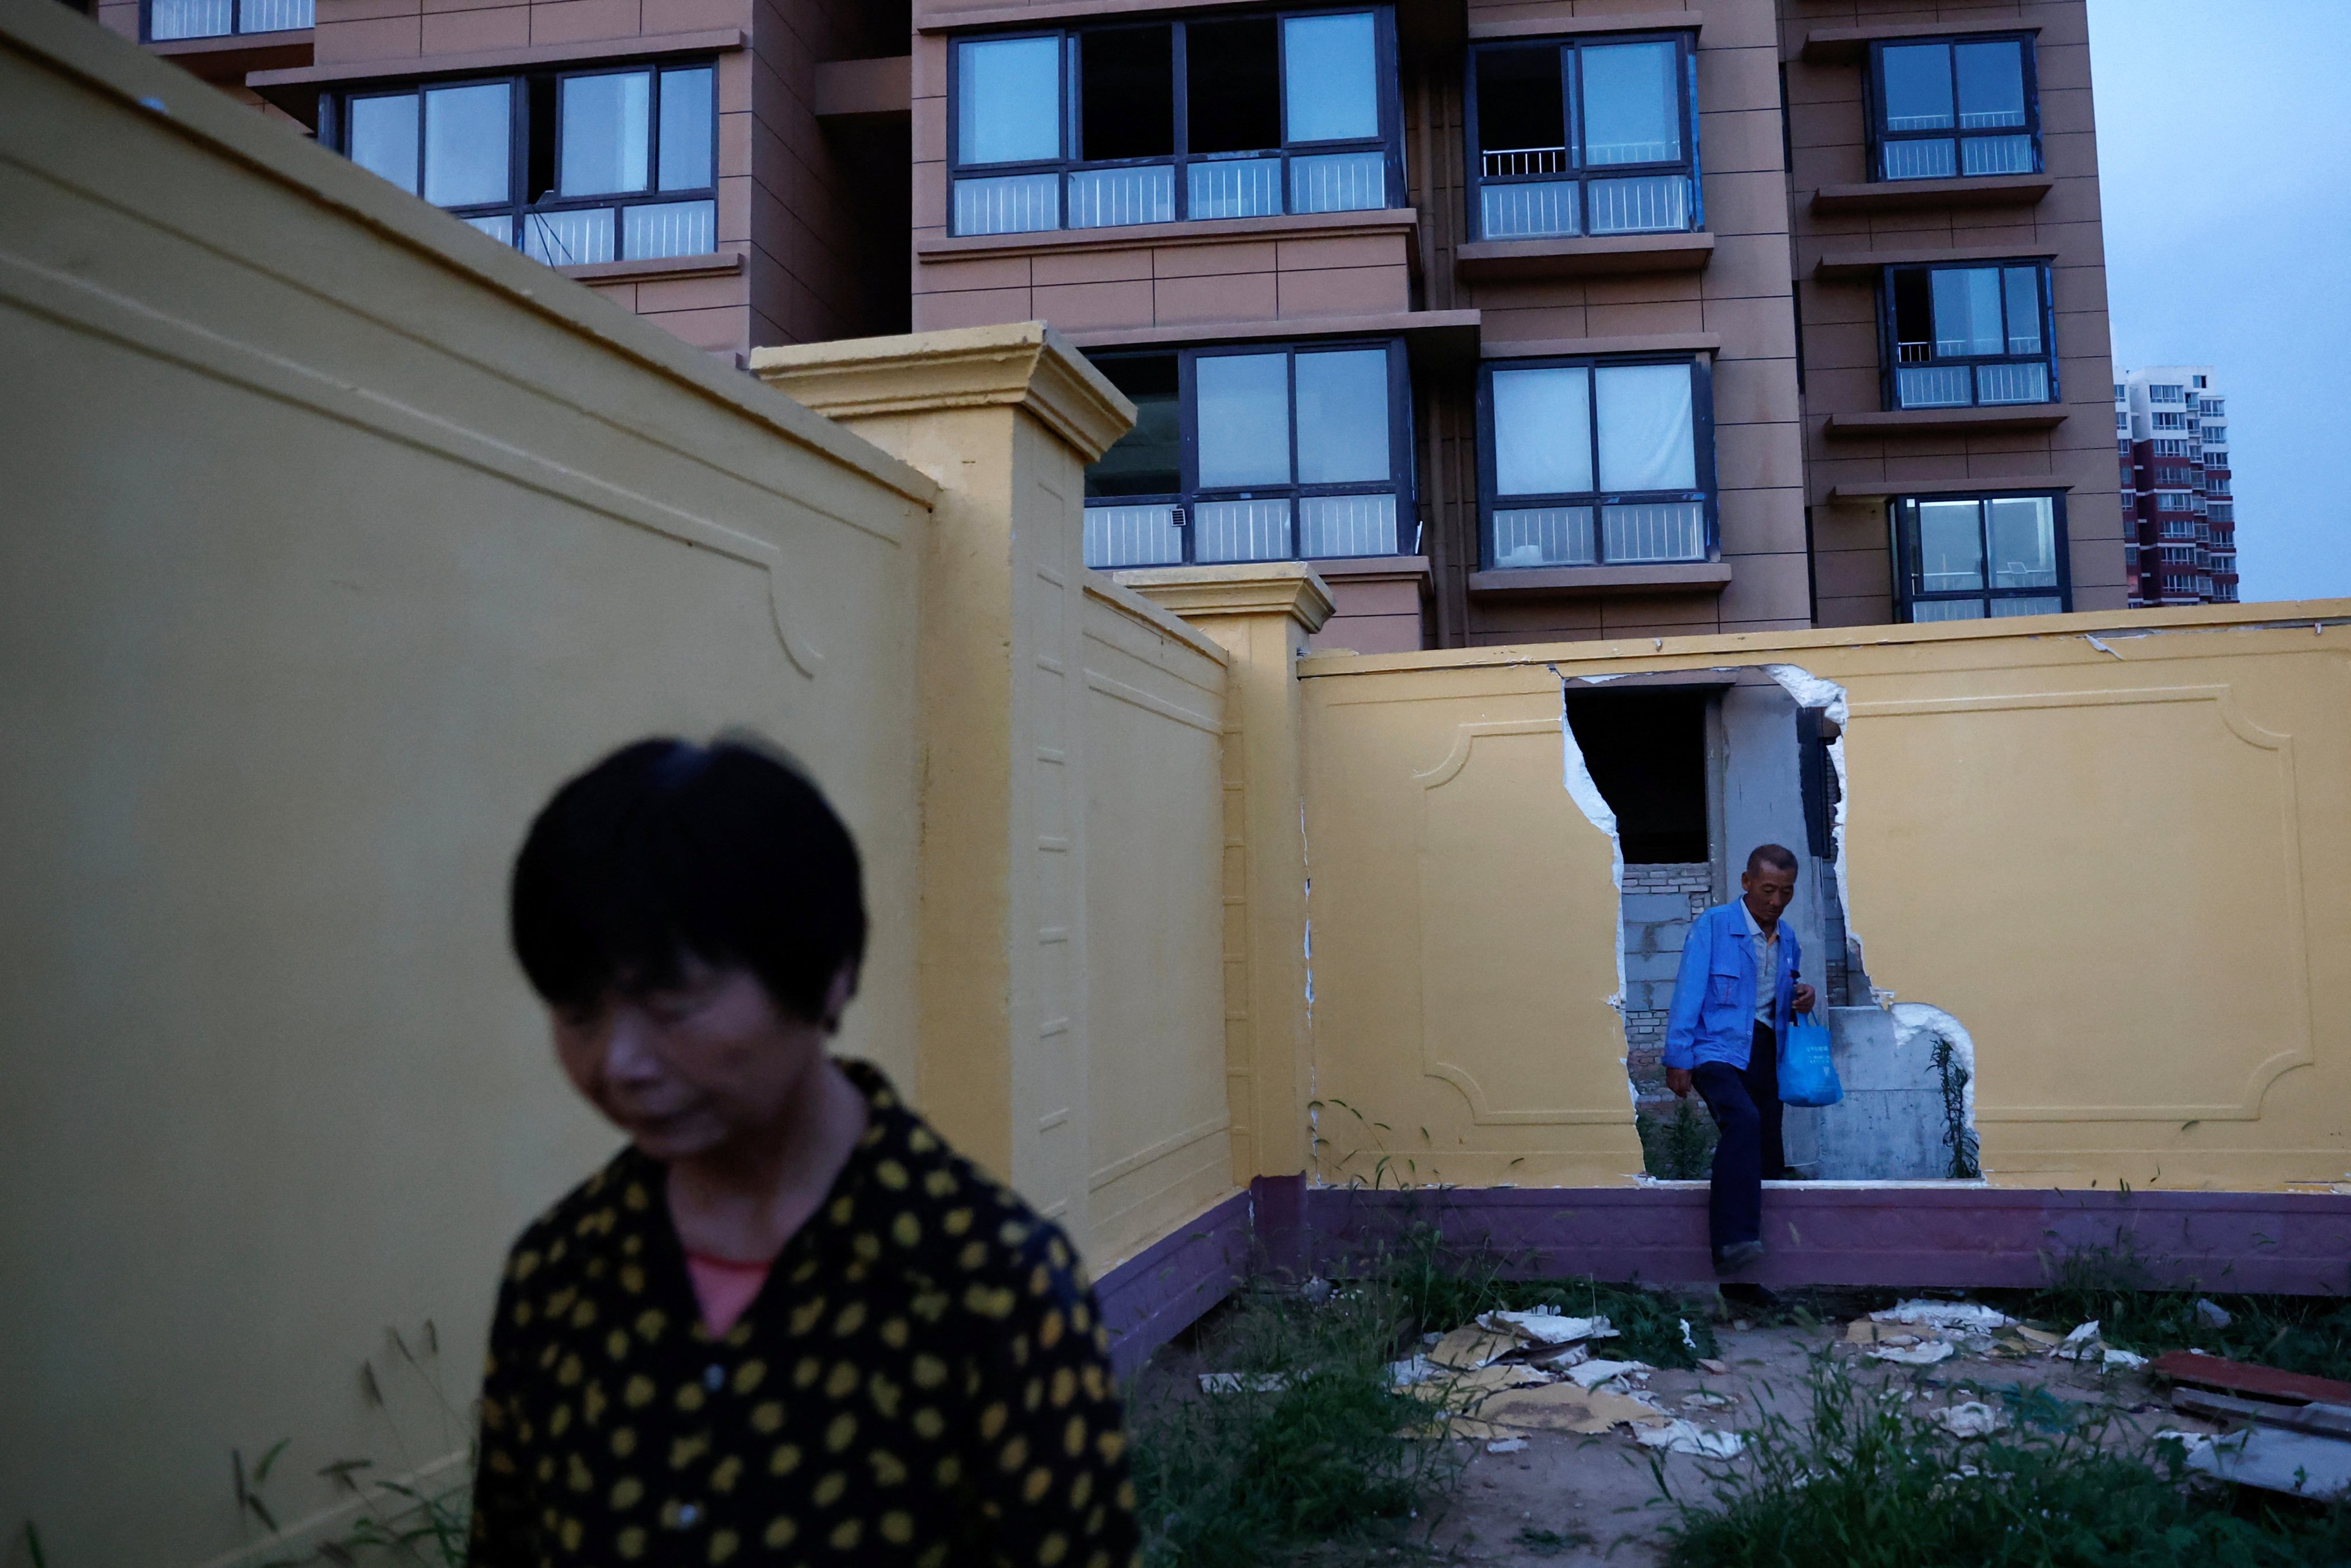 Homebuyers leave their residential compound through a hole in a wall, at the unfinished Gaotie Wellness City complex in Tongchuan, Shaanxi province, China on September 12. Photo: Reuters 